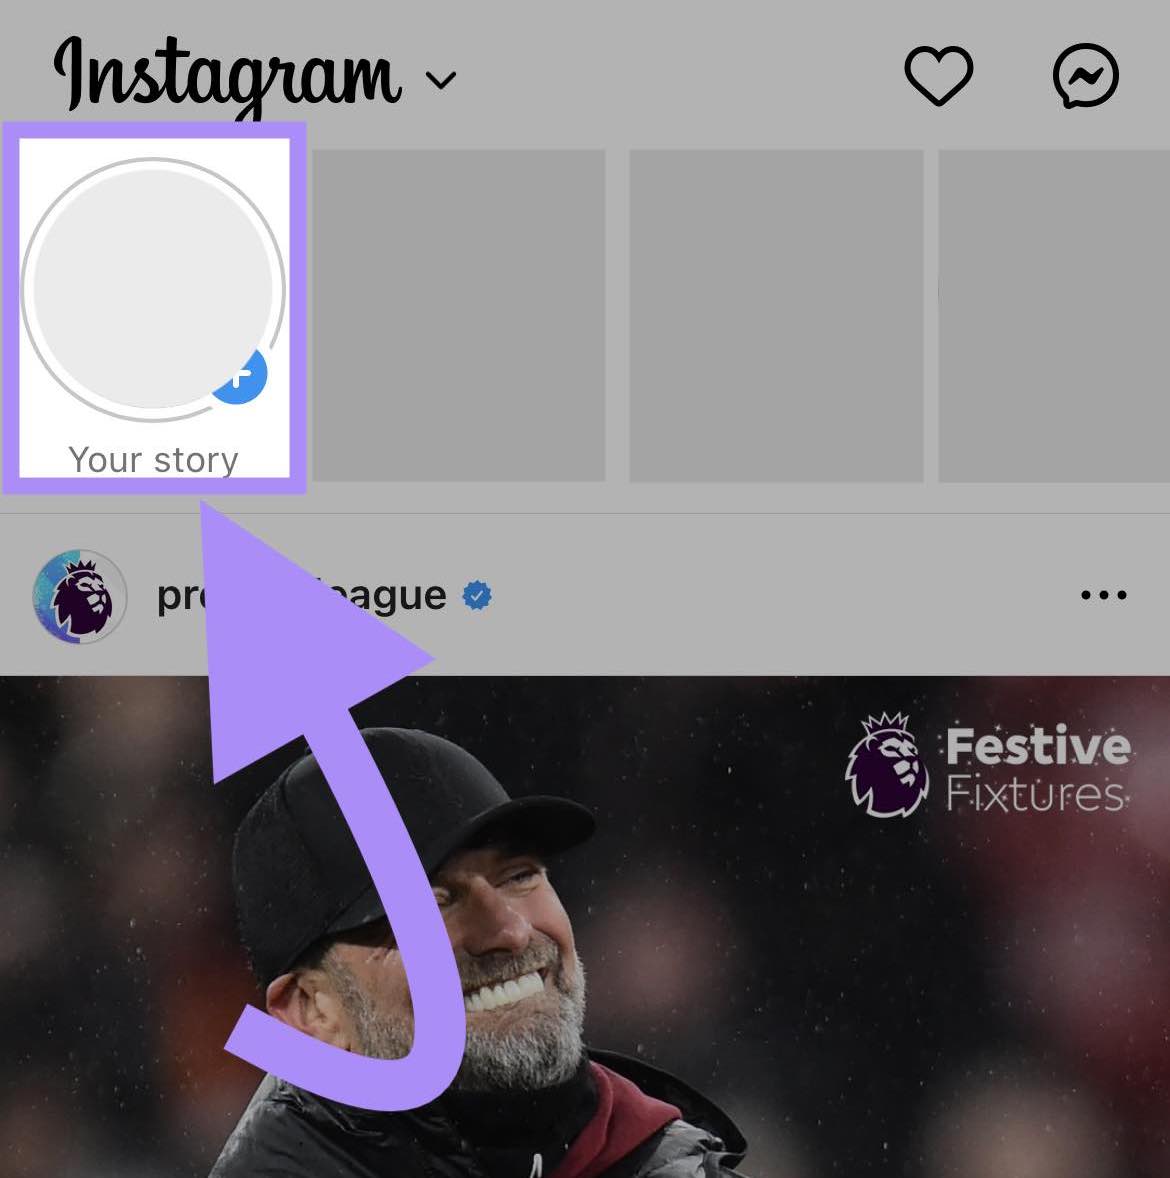 “Your story” with a illustration   representation  highlighted successful  Instagram app